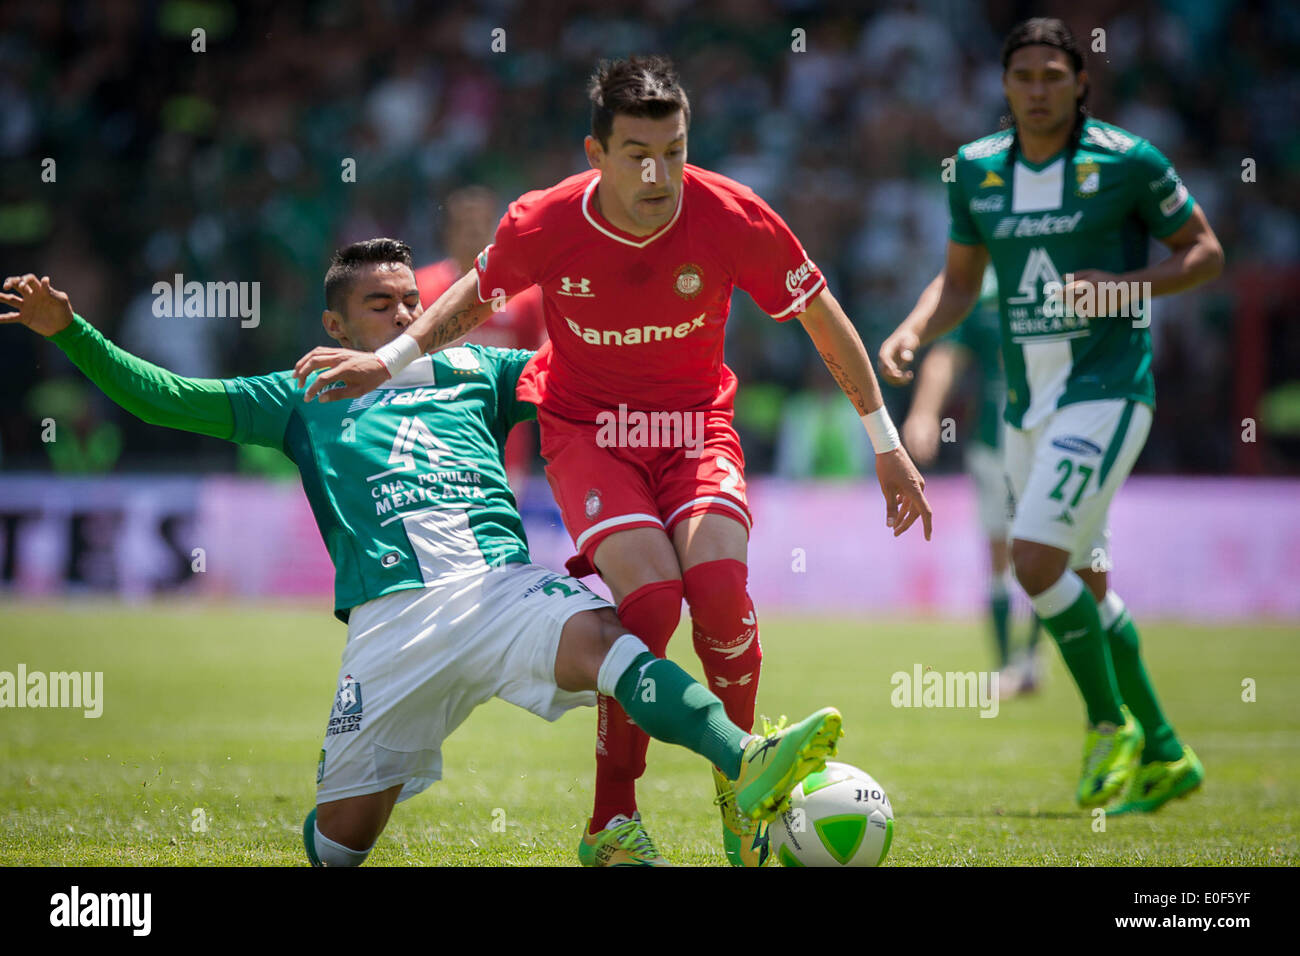 Toluca, Mexico. 11th May, 2014. Toluca's Edgar Benitez (C) vies for the ball with Juan Jose Vazquez (L) of Leon during their second leg semifinal match of the Liga MX Closing Tournament at Nemesio Diez Stadium in Toluca, State of Mexico, Mexico, on May 11, 2014. Leon won 1-0 and entered the final by 2-0 on aggregate. © Pedro Mera/Xinhua/Alamy Live News Stock Photo